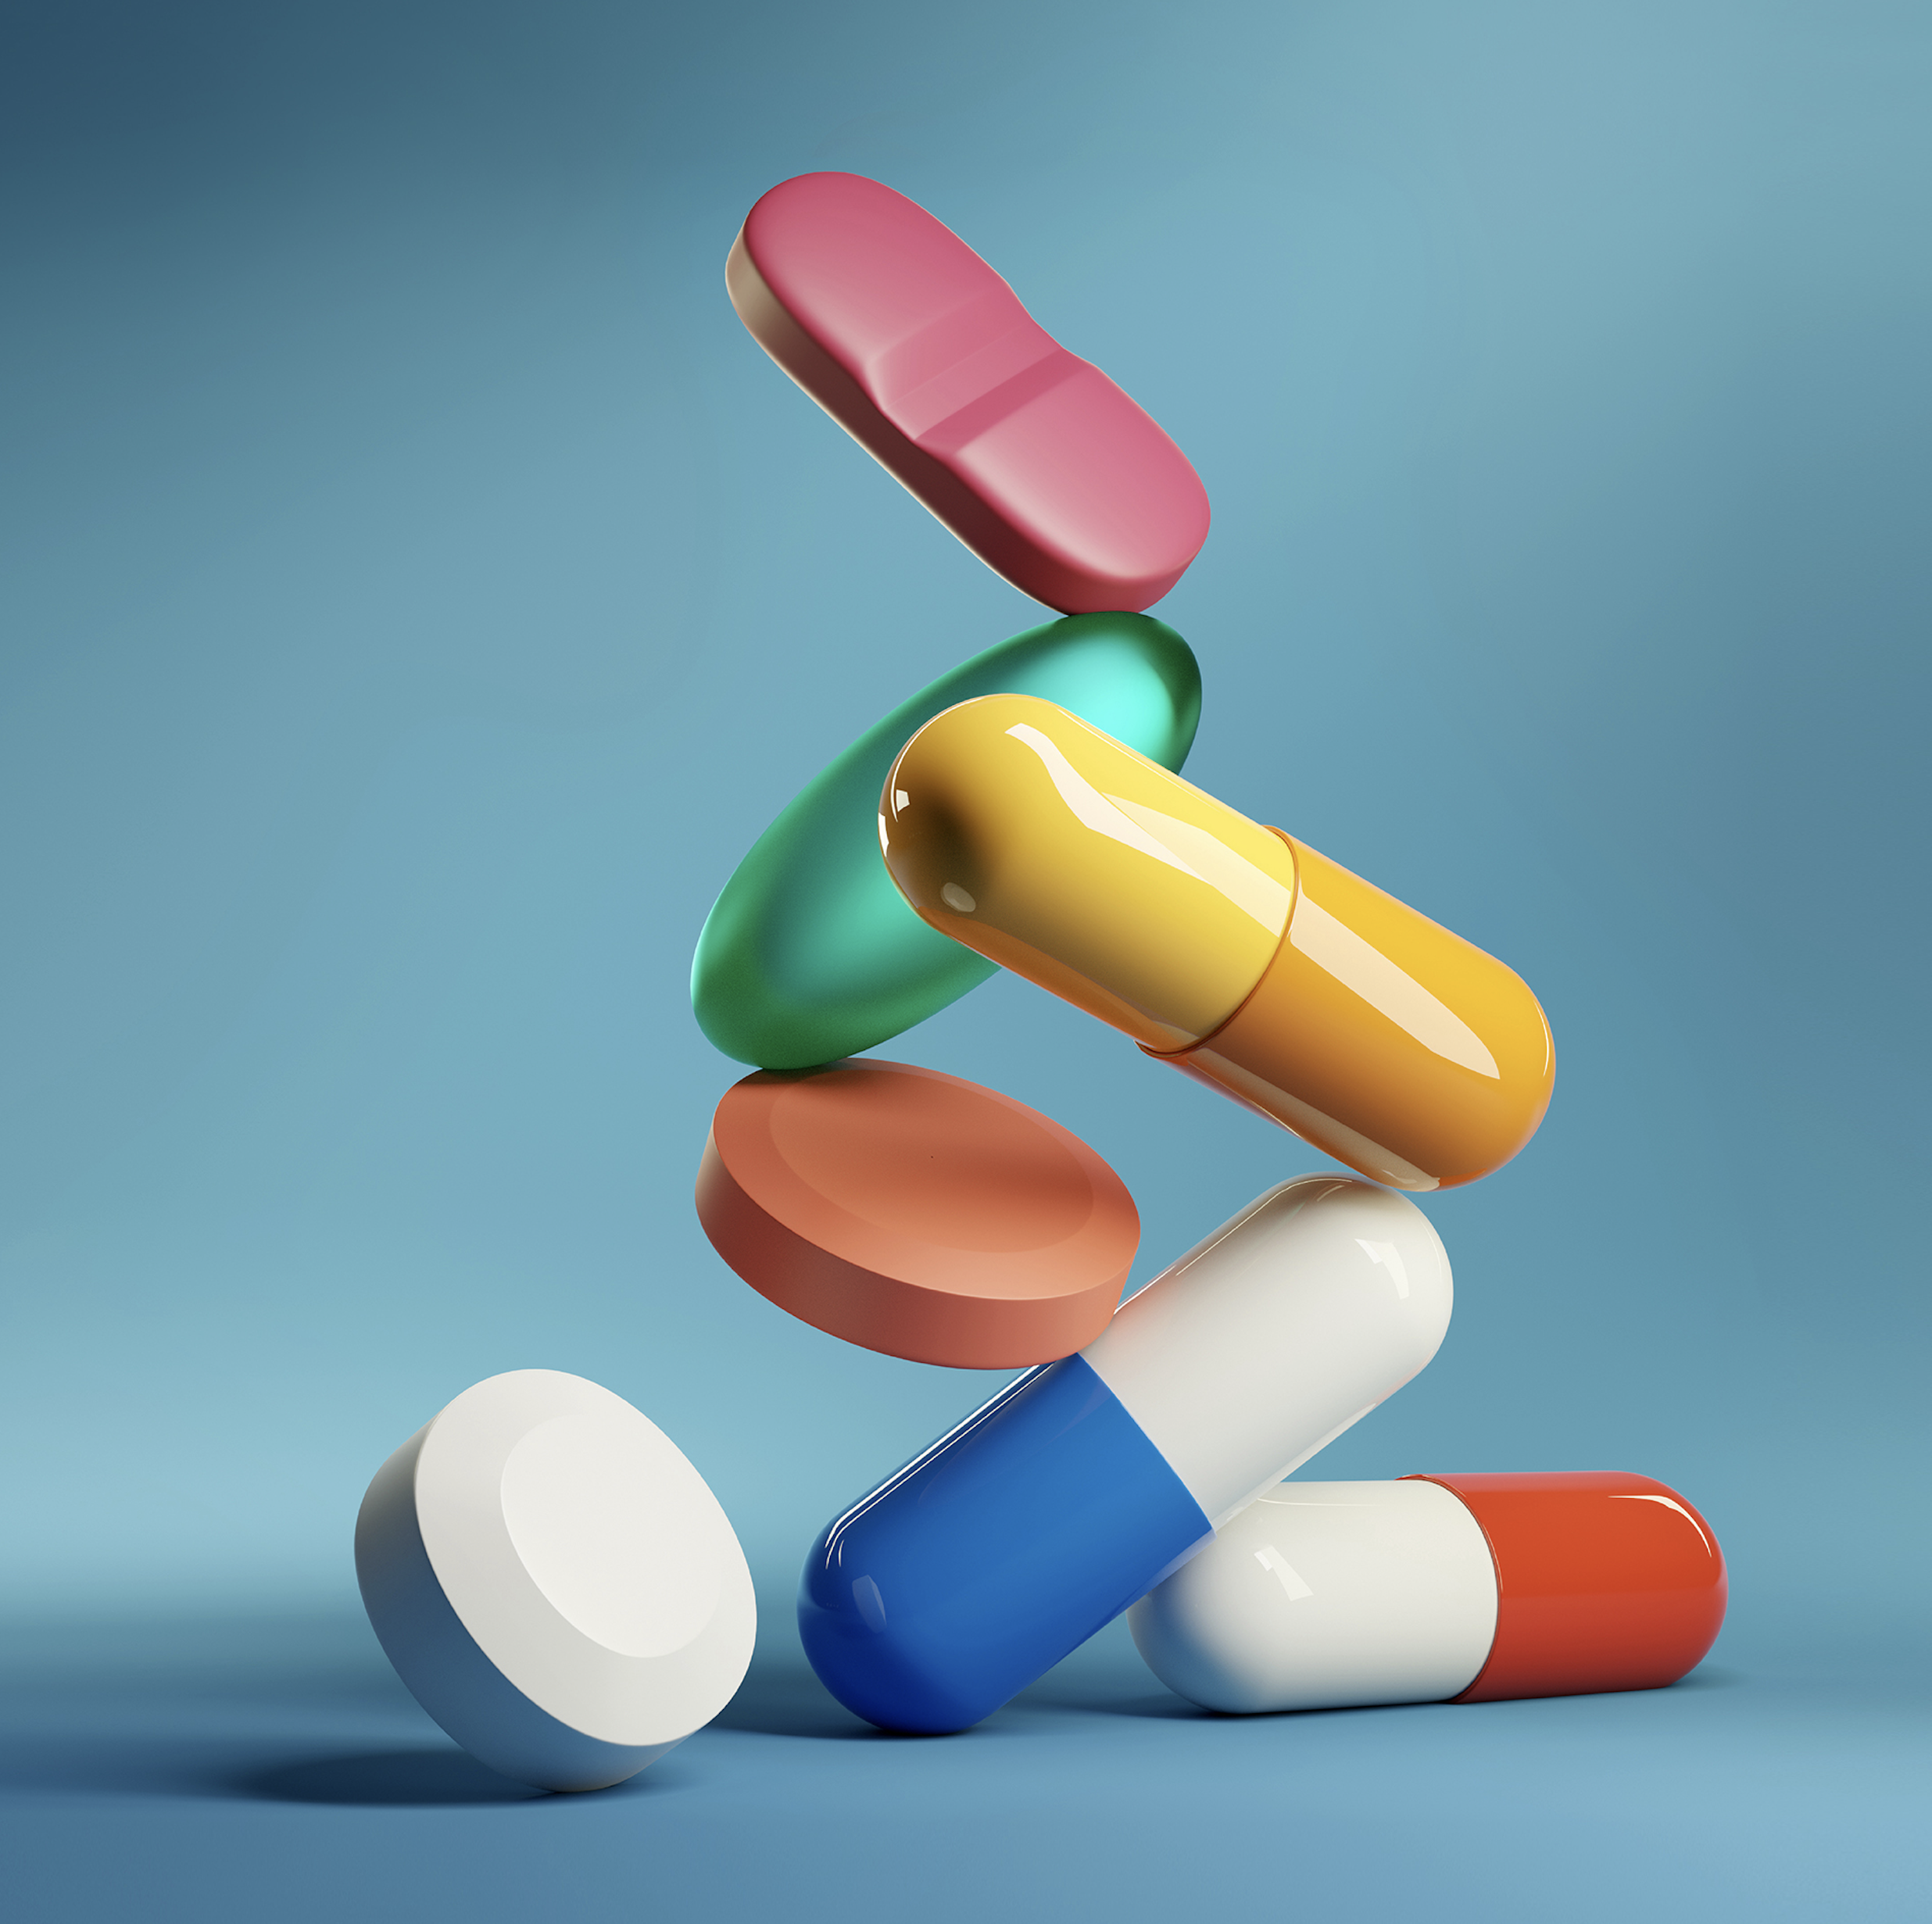 Optimizing Medication Safety in Primary Care & Outpatient Settings: An Interactive Series